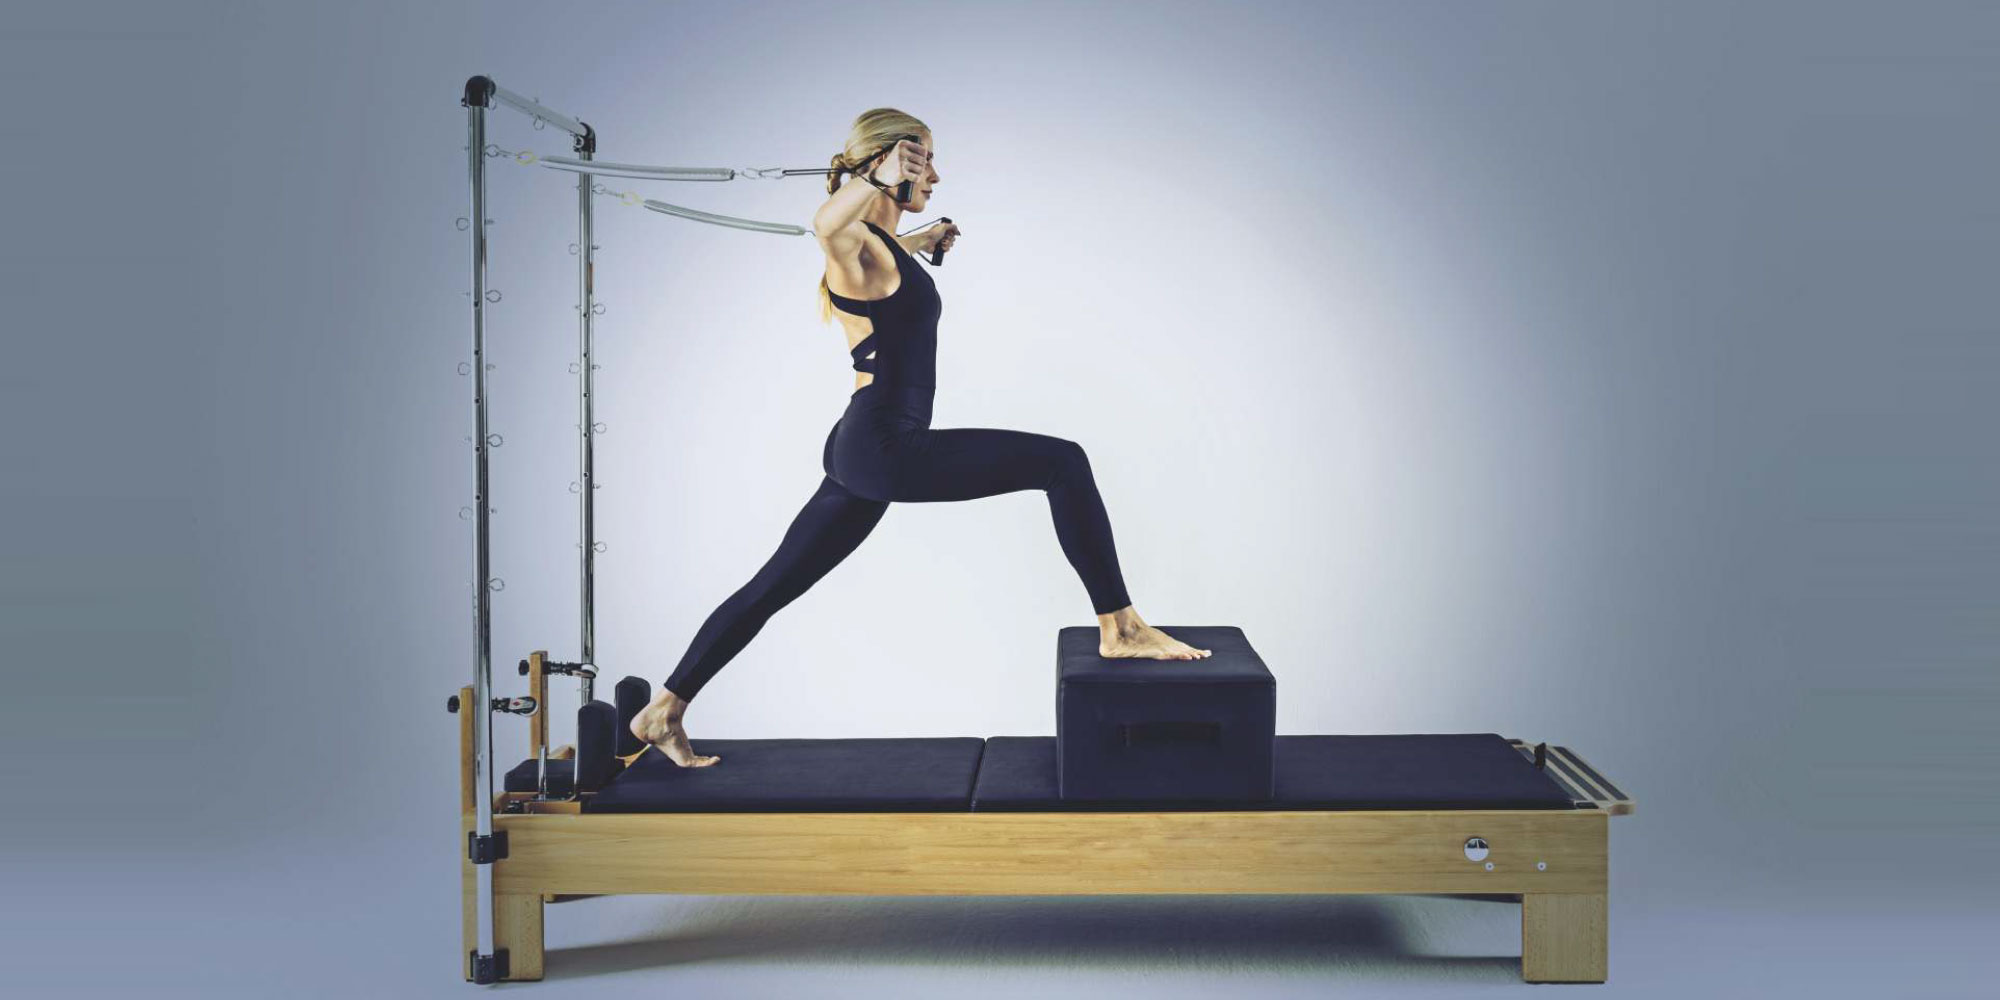 Pilates Reformer with Tower, Pilates Equipment Fitness